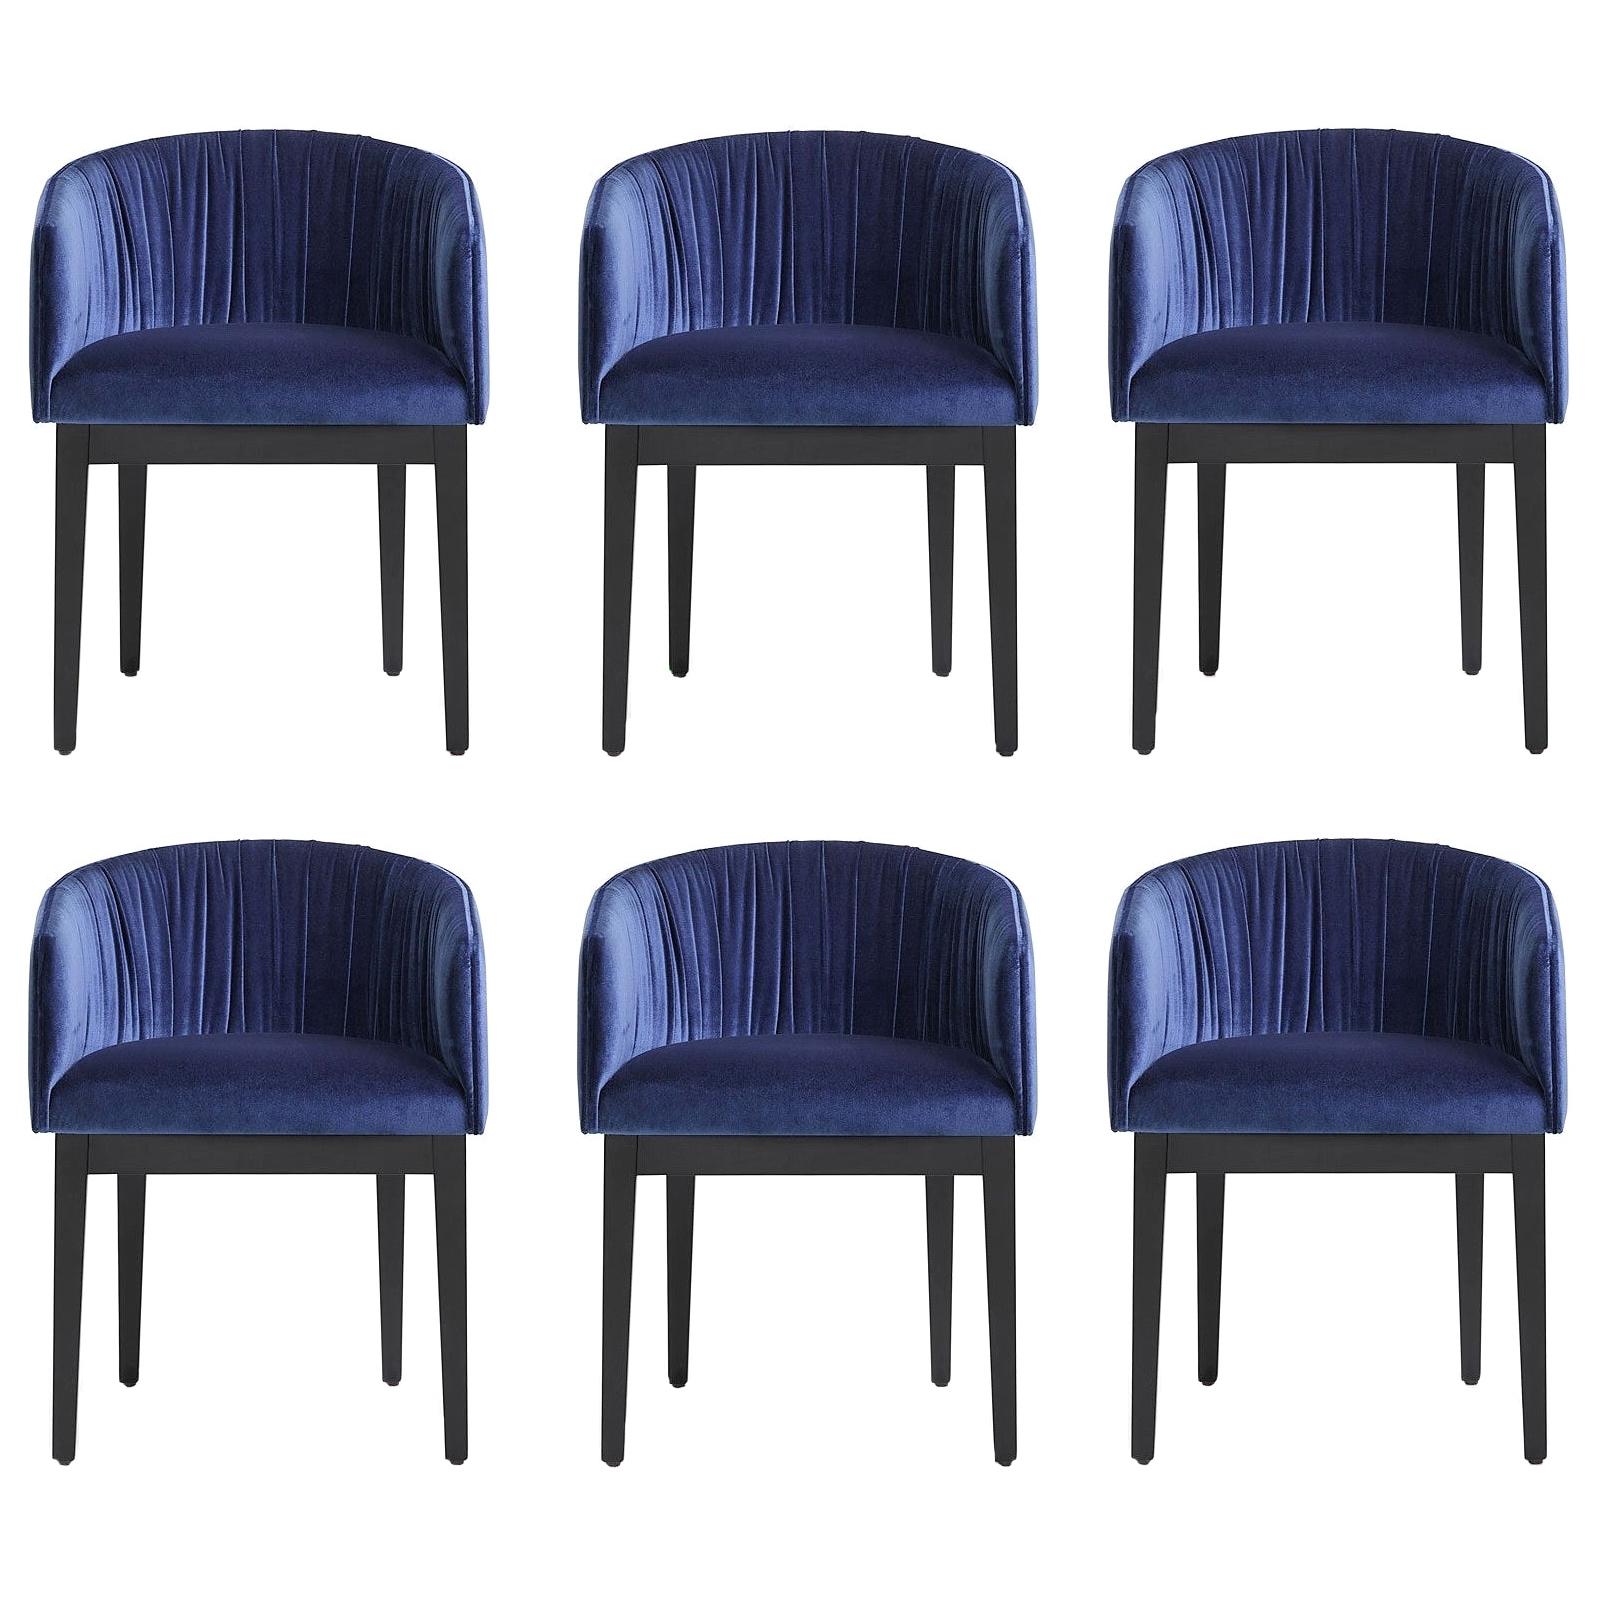 Featuring navy blue velvet upholstery, wooden legs lacquered in black and a curved silhouette worth sinking into, a timeless elegant design crafted to blend easily with any décor style. 
This chair is heavily constructed and suitable for contract